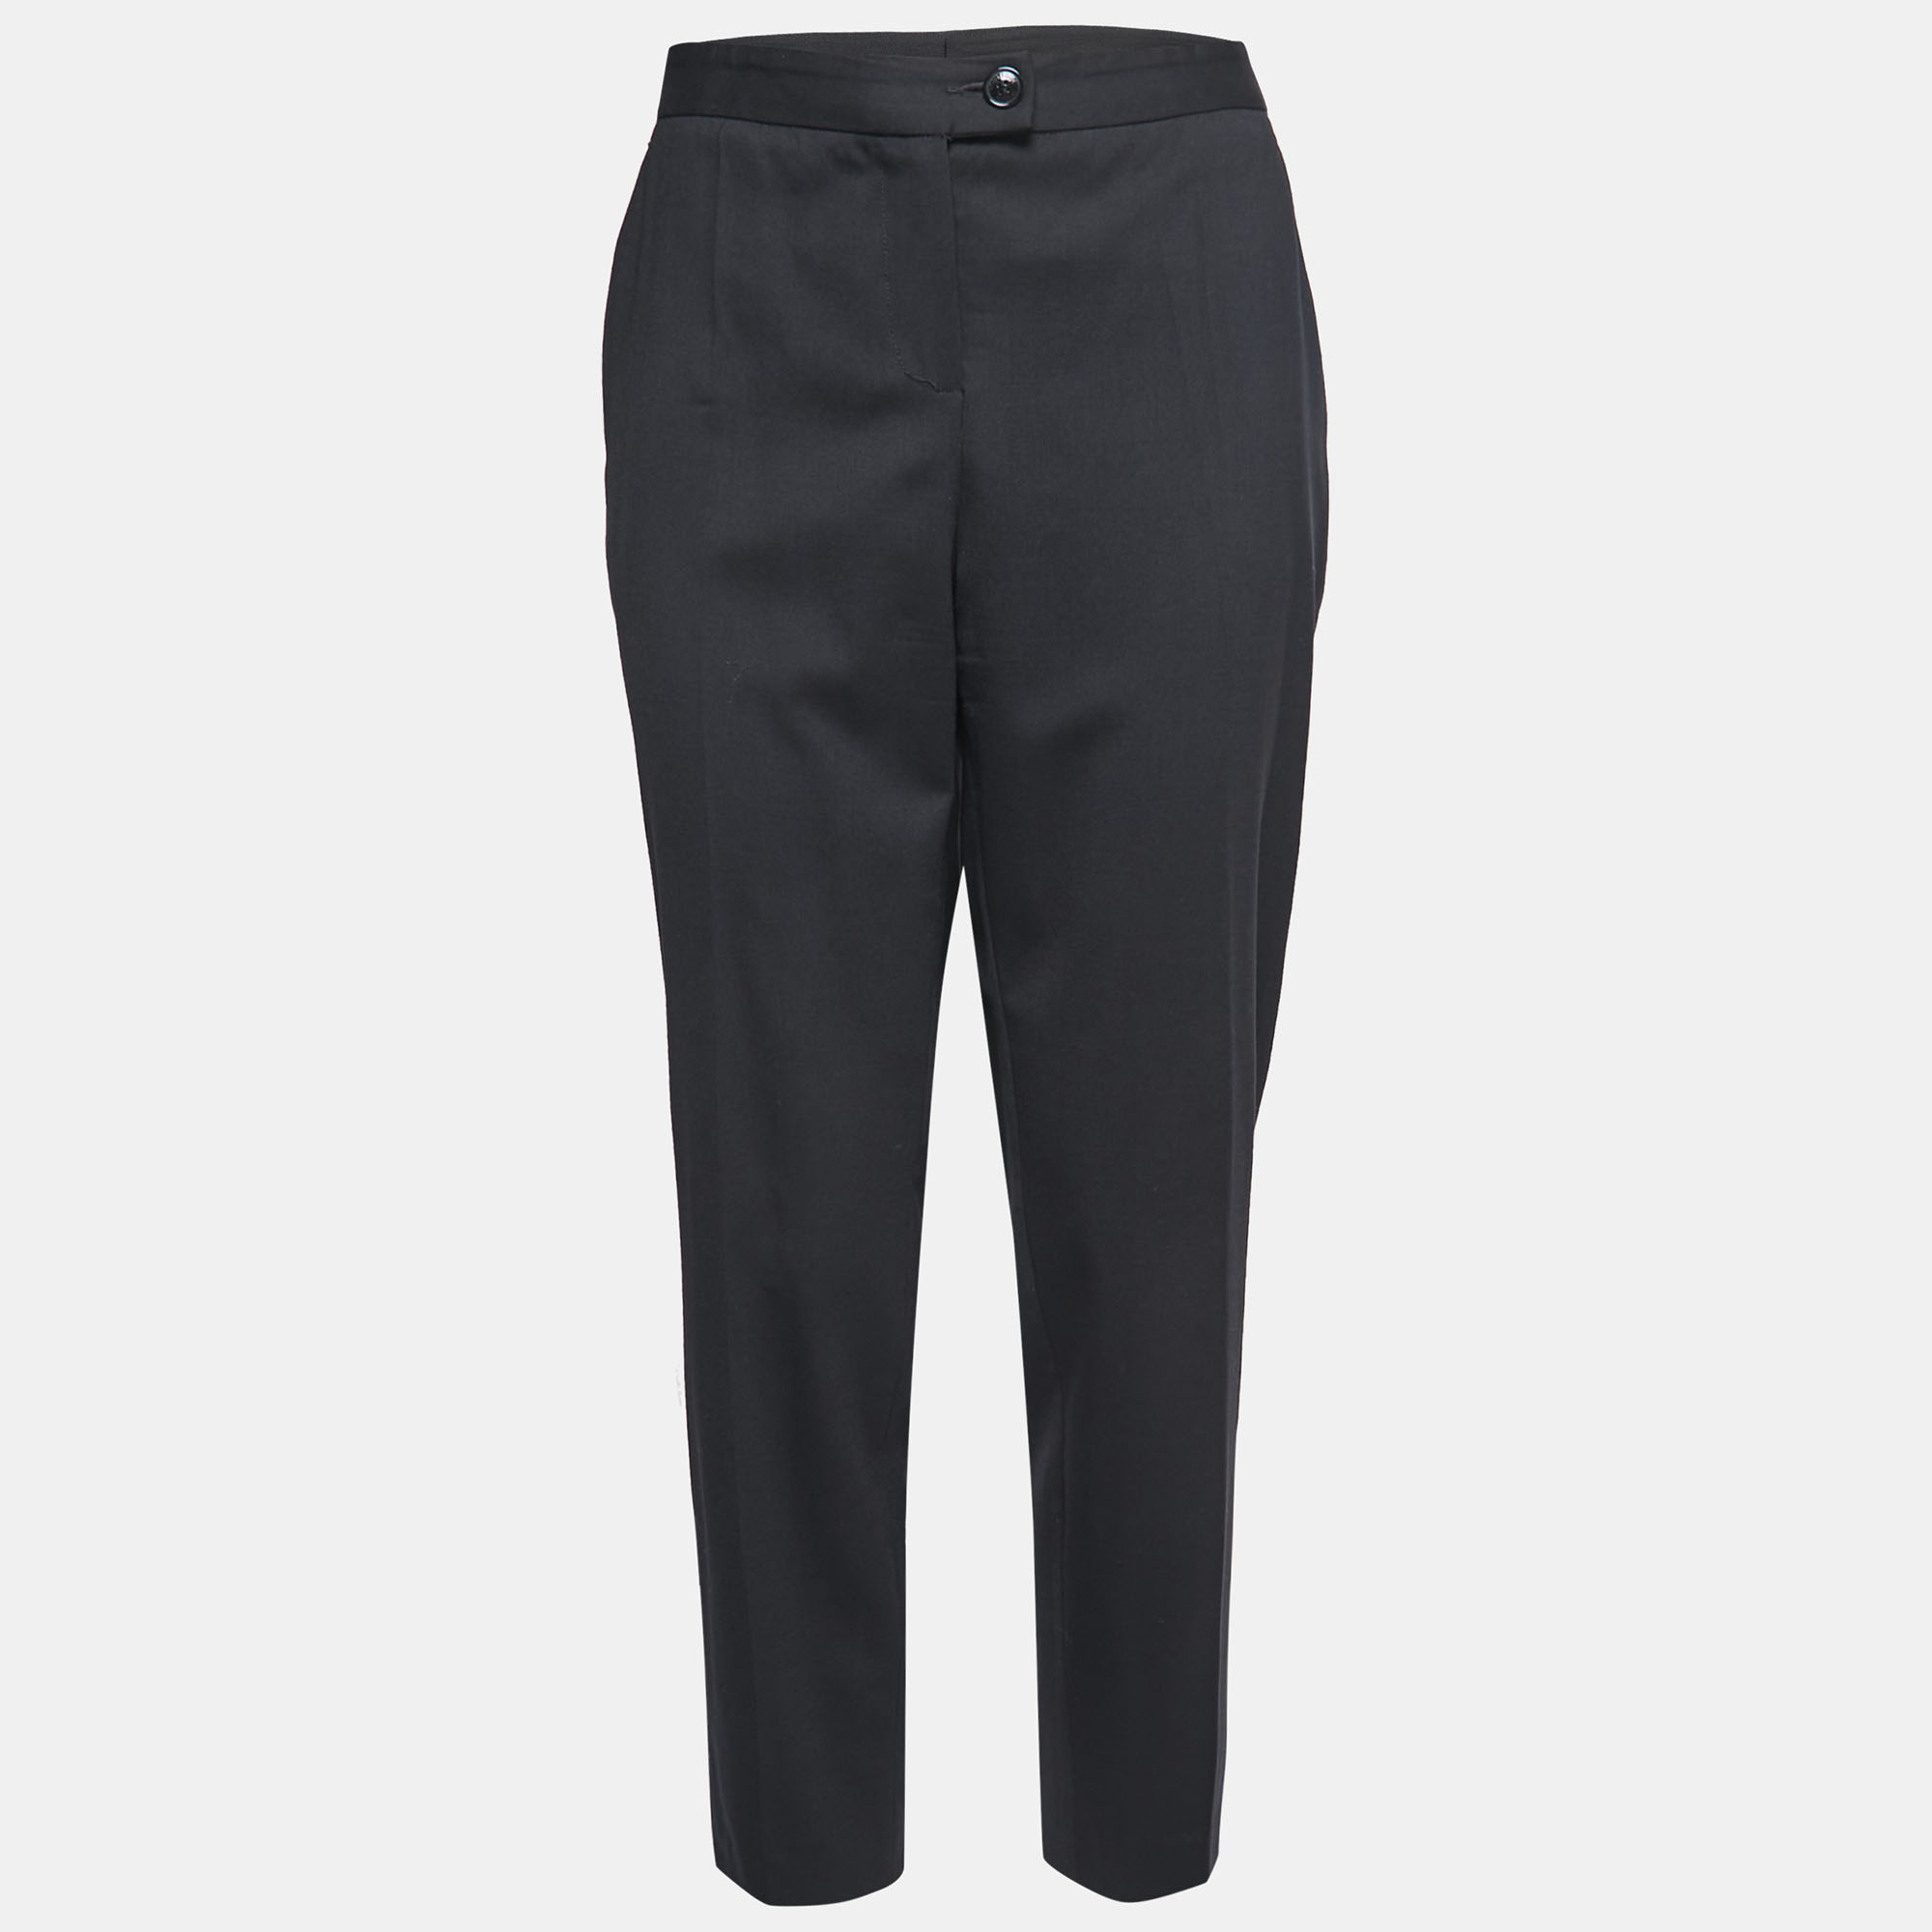 Boutique Moschino Black Wool Crepe Trousers L